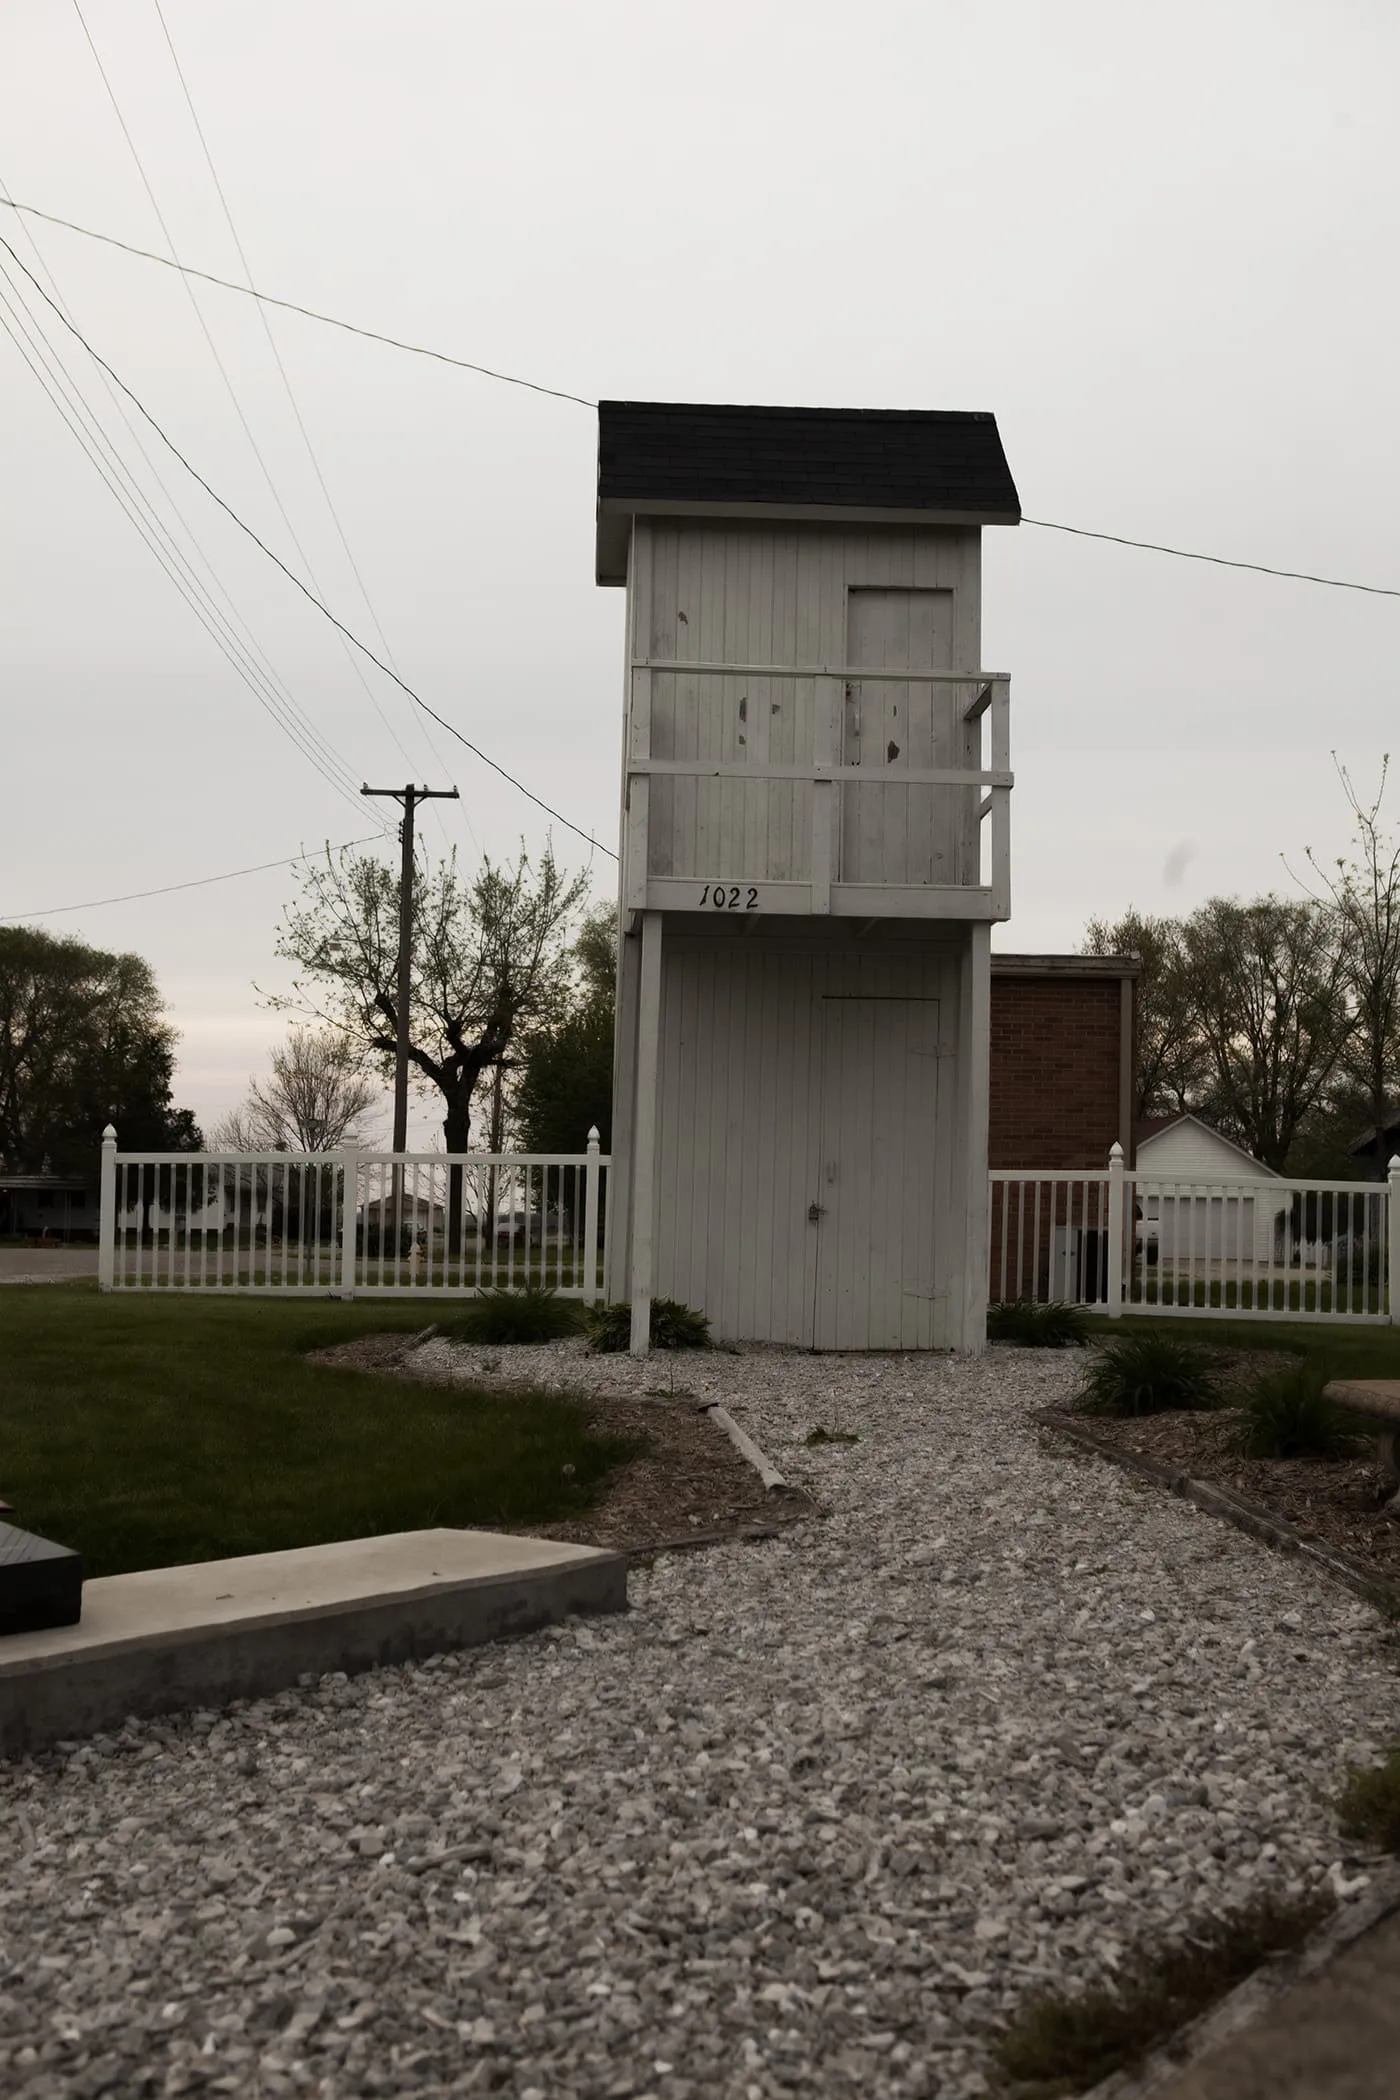 Two-Story Outhouse, a roadside attraction in Gays, Illinois